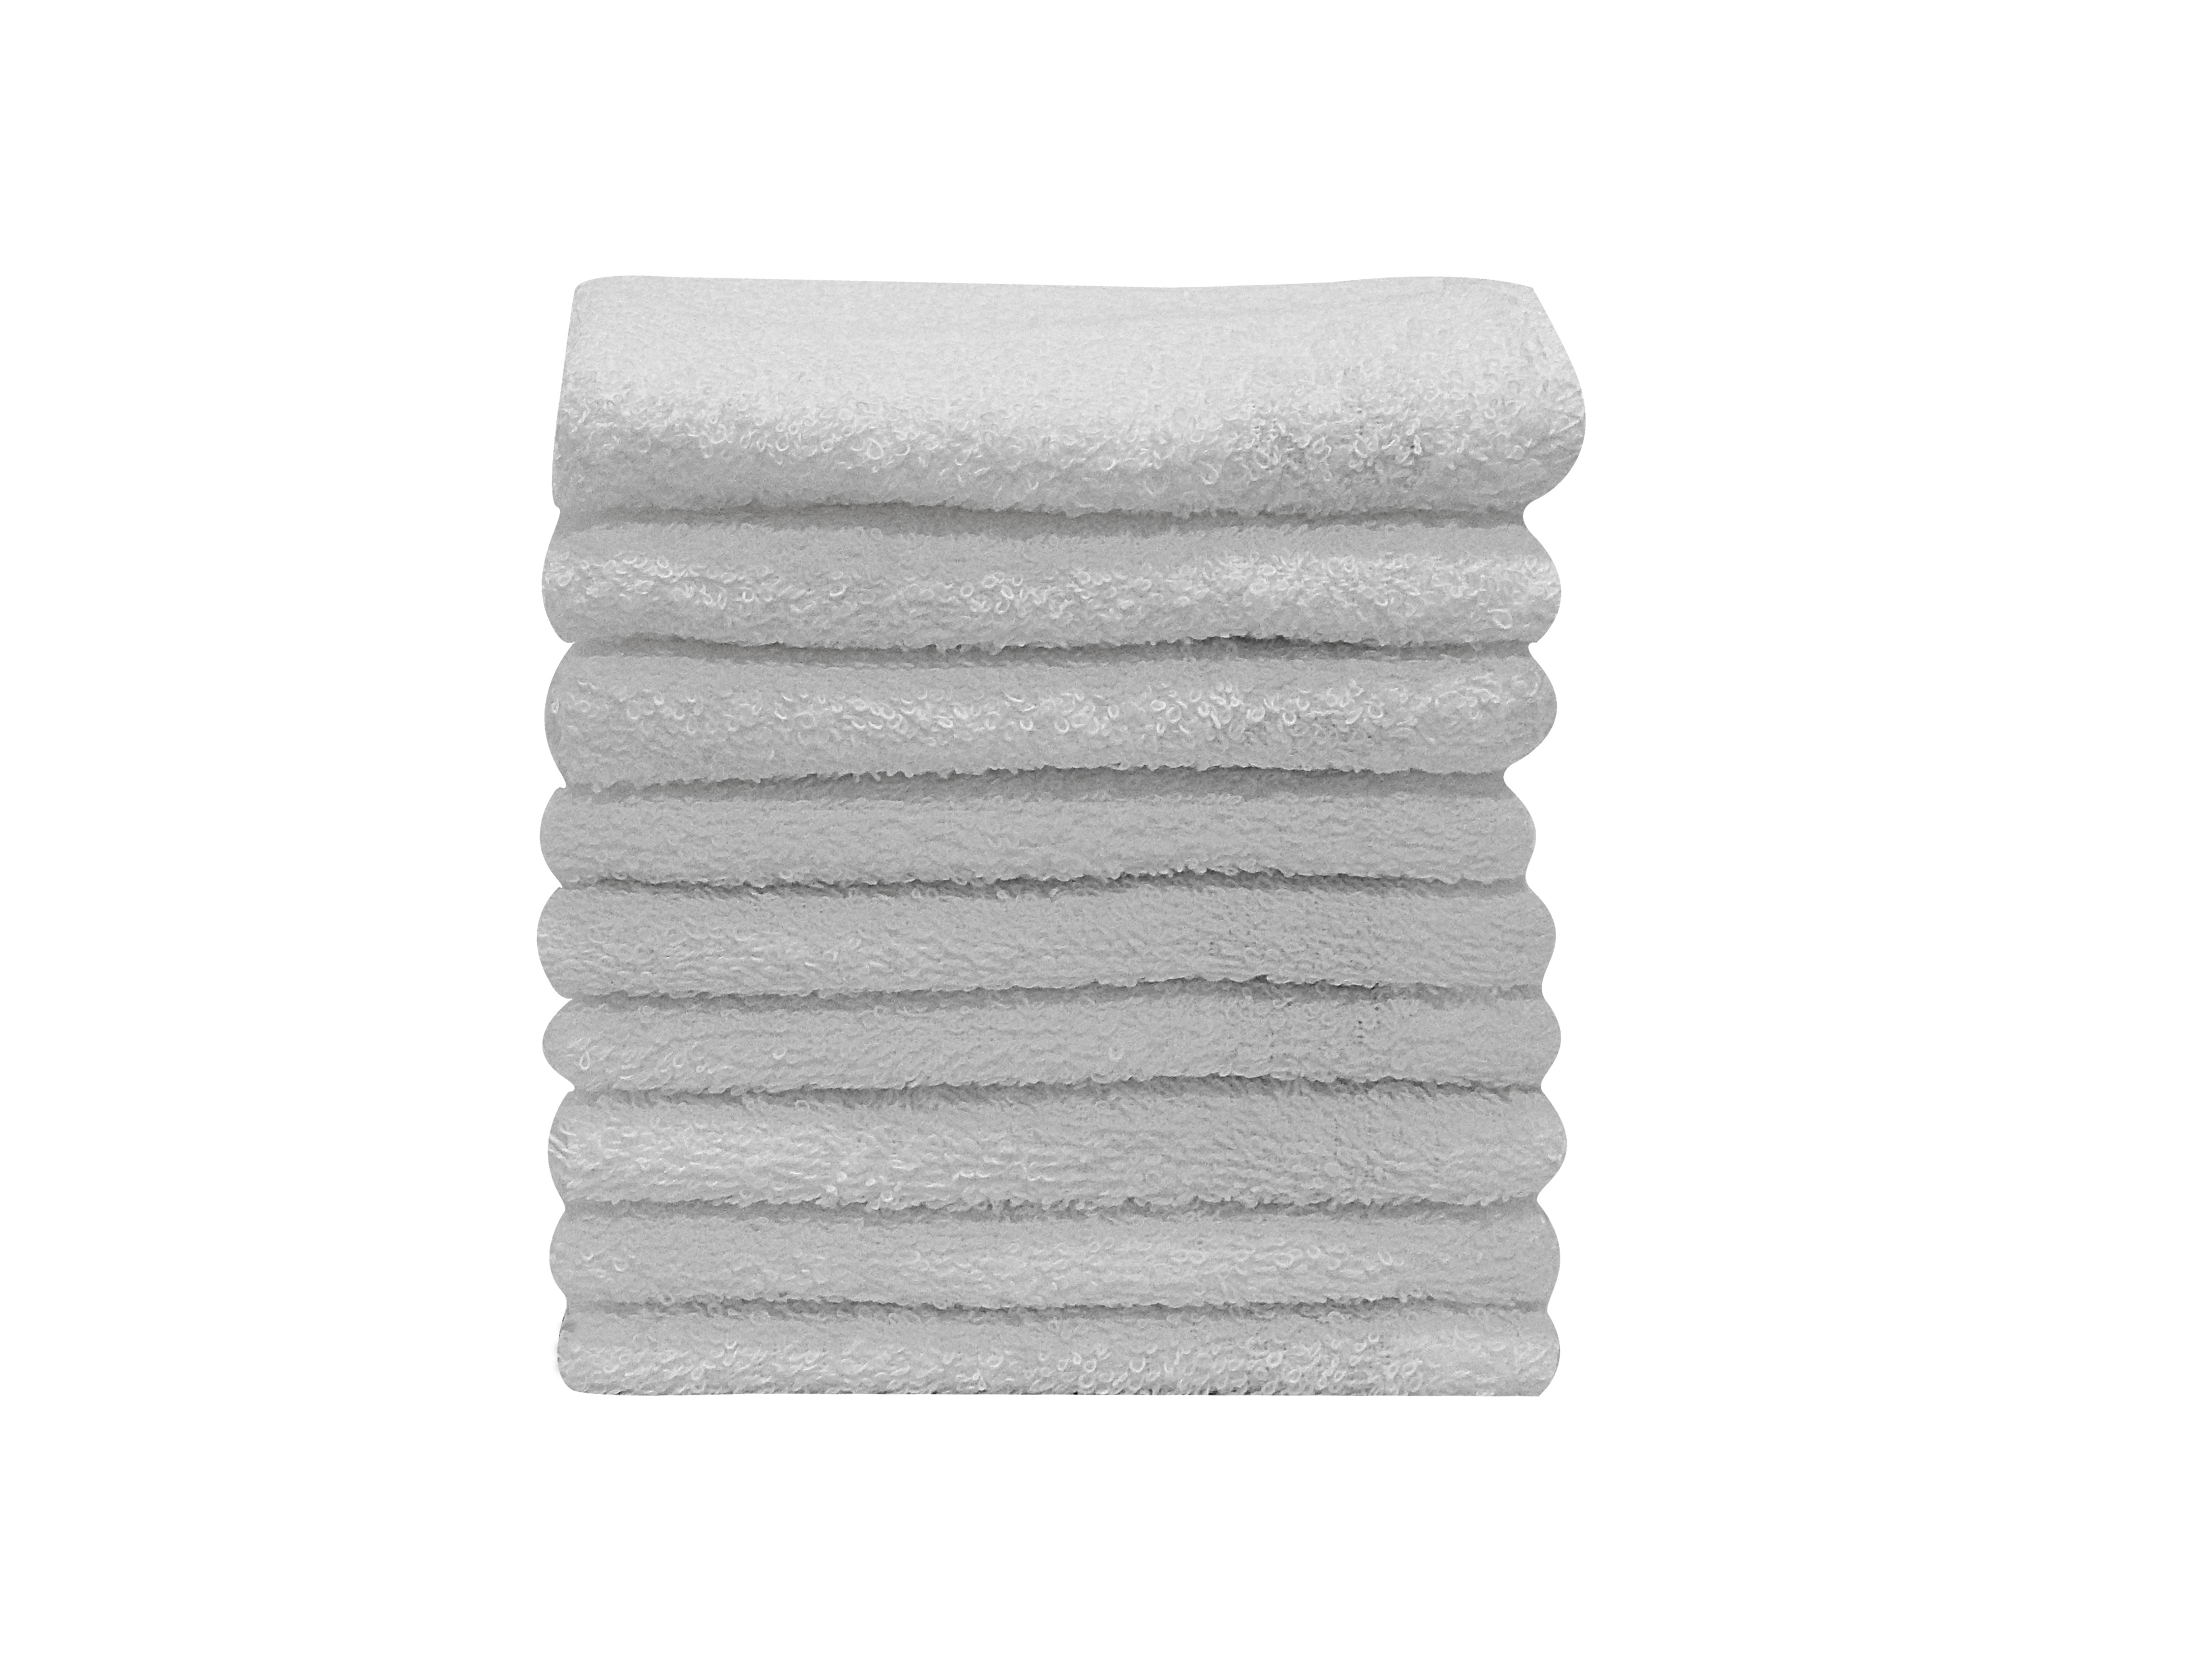 NEW WHITE COTTON TERRY CLOTH CLEANING RAGS 1st QUALITY WIPING CLOTHS Details about   5 Lbs 